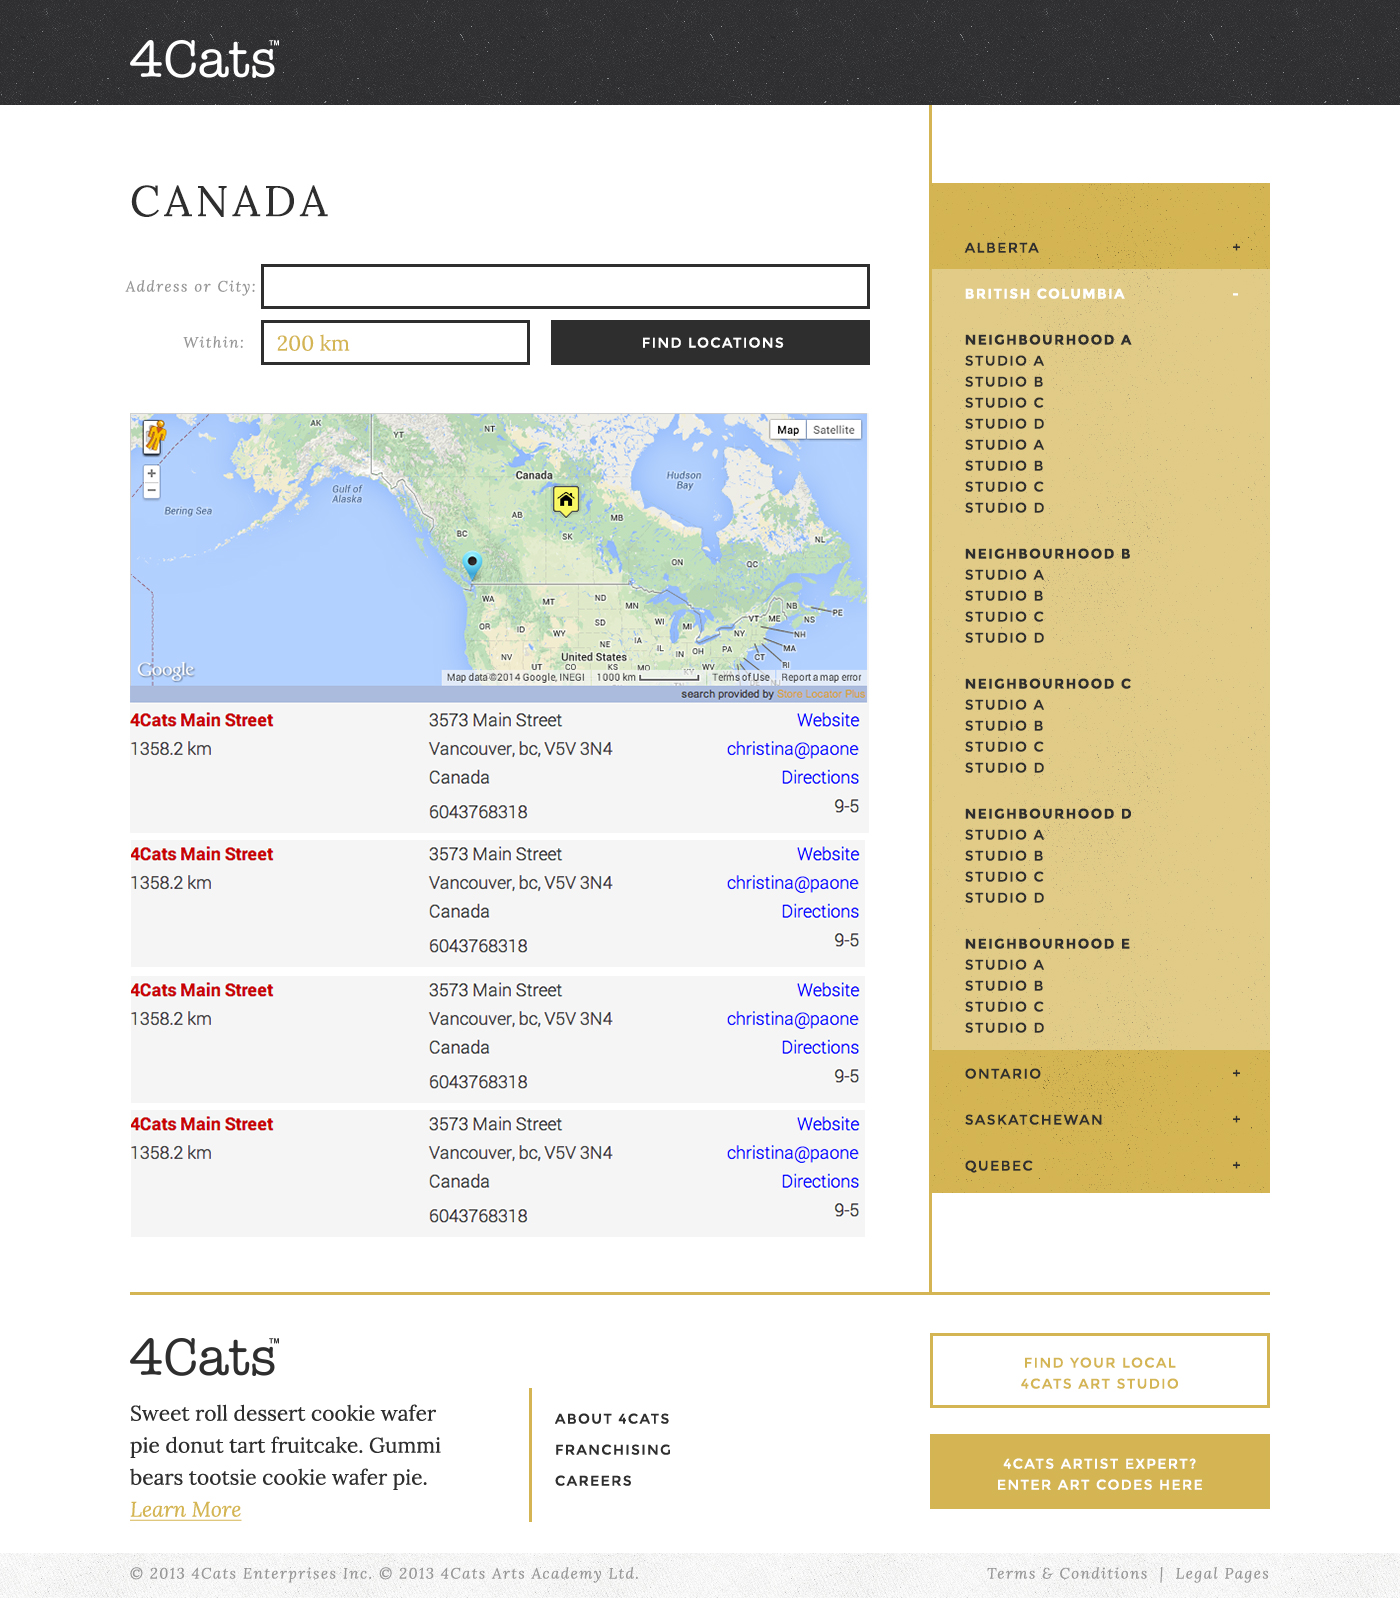 design revision of store finder web page design on a multi-location website